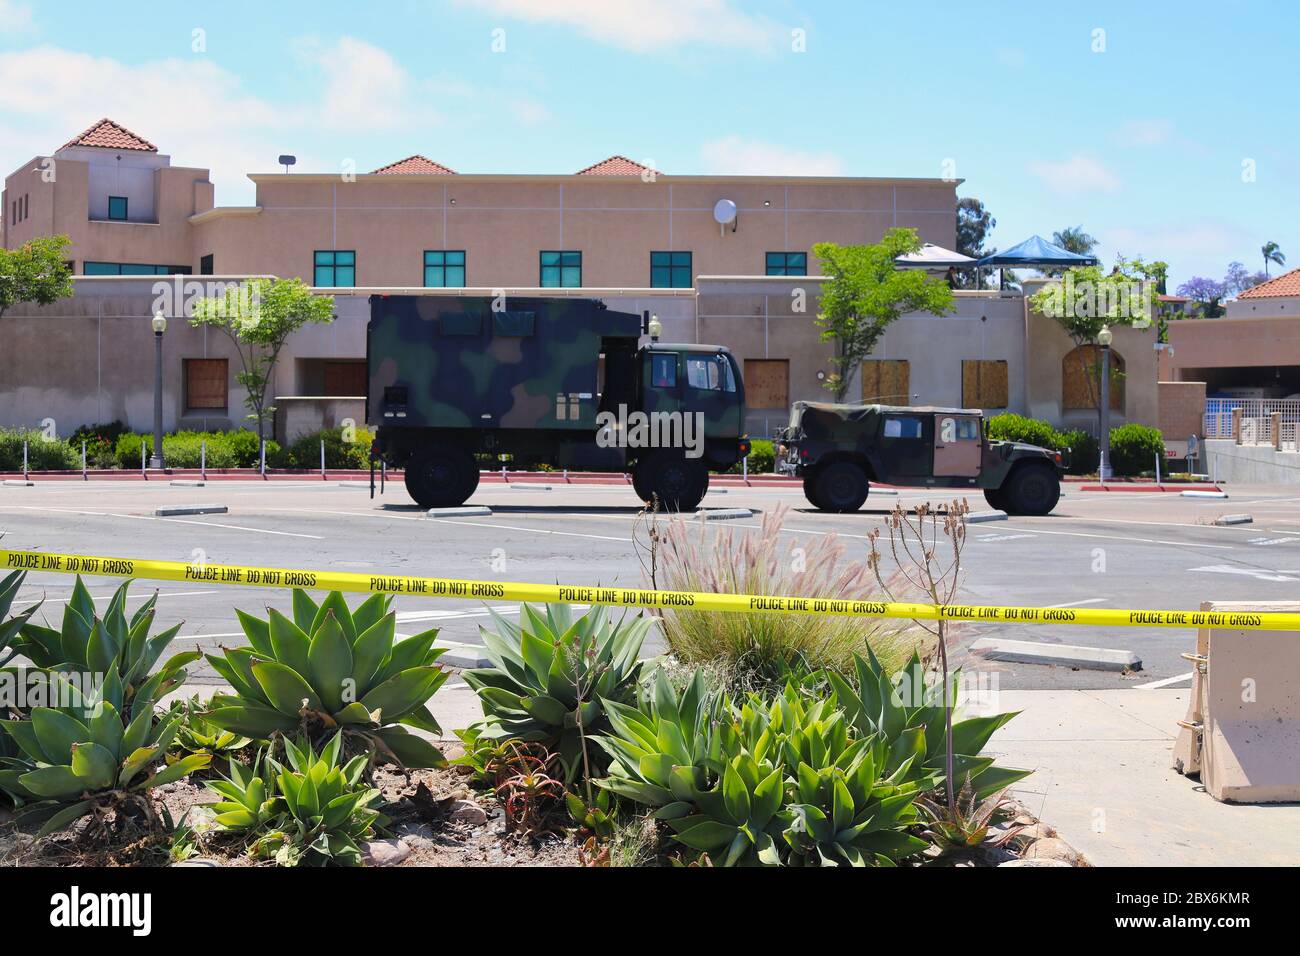 La Mesa, CA June 4, 2020  National Guard vehicles at boarded up La Mesa City Hall blocked off with yellow police tape after riots and protests Stock Photo